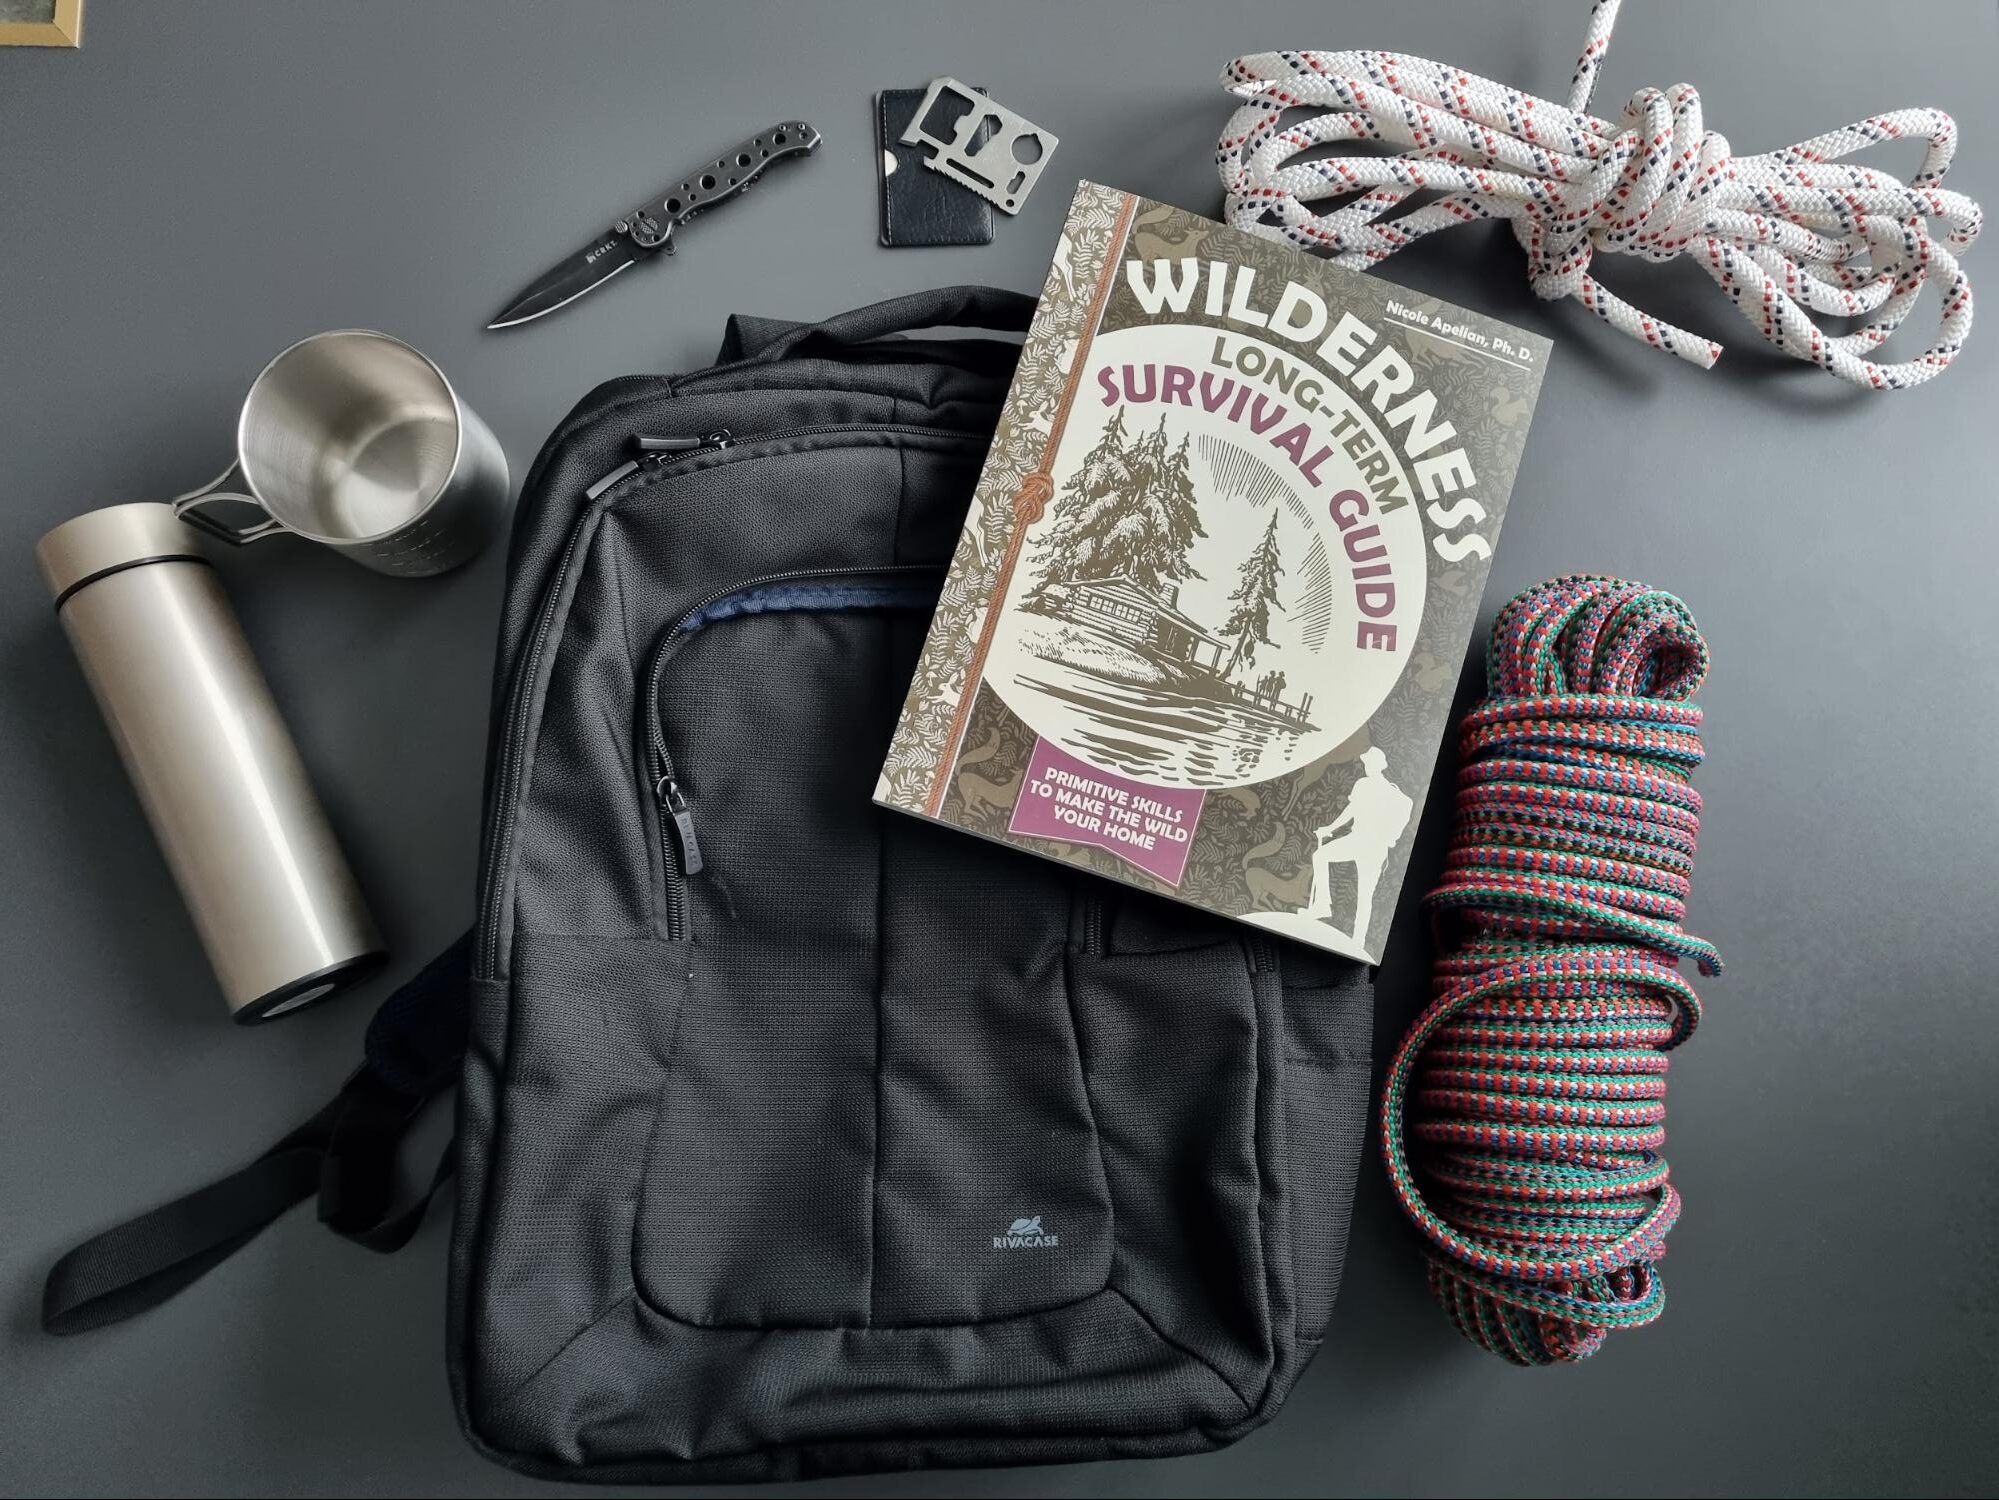 Nicole Apelian's Long Term Wilderness Survival Guide and supplies